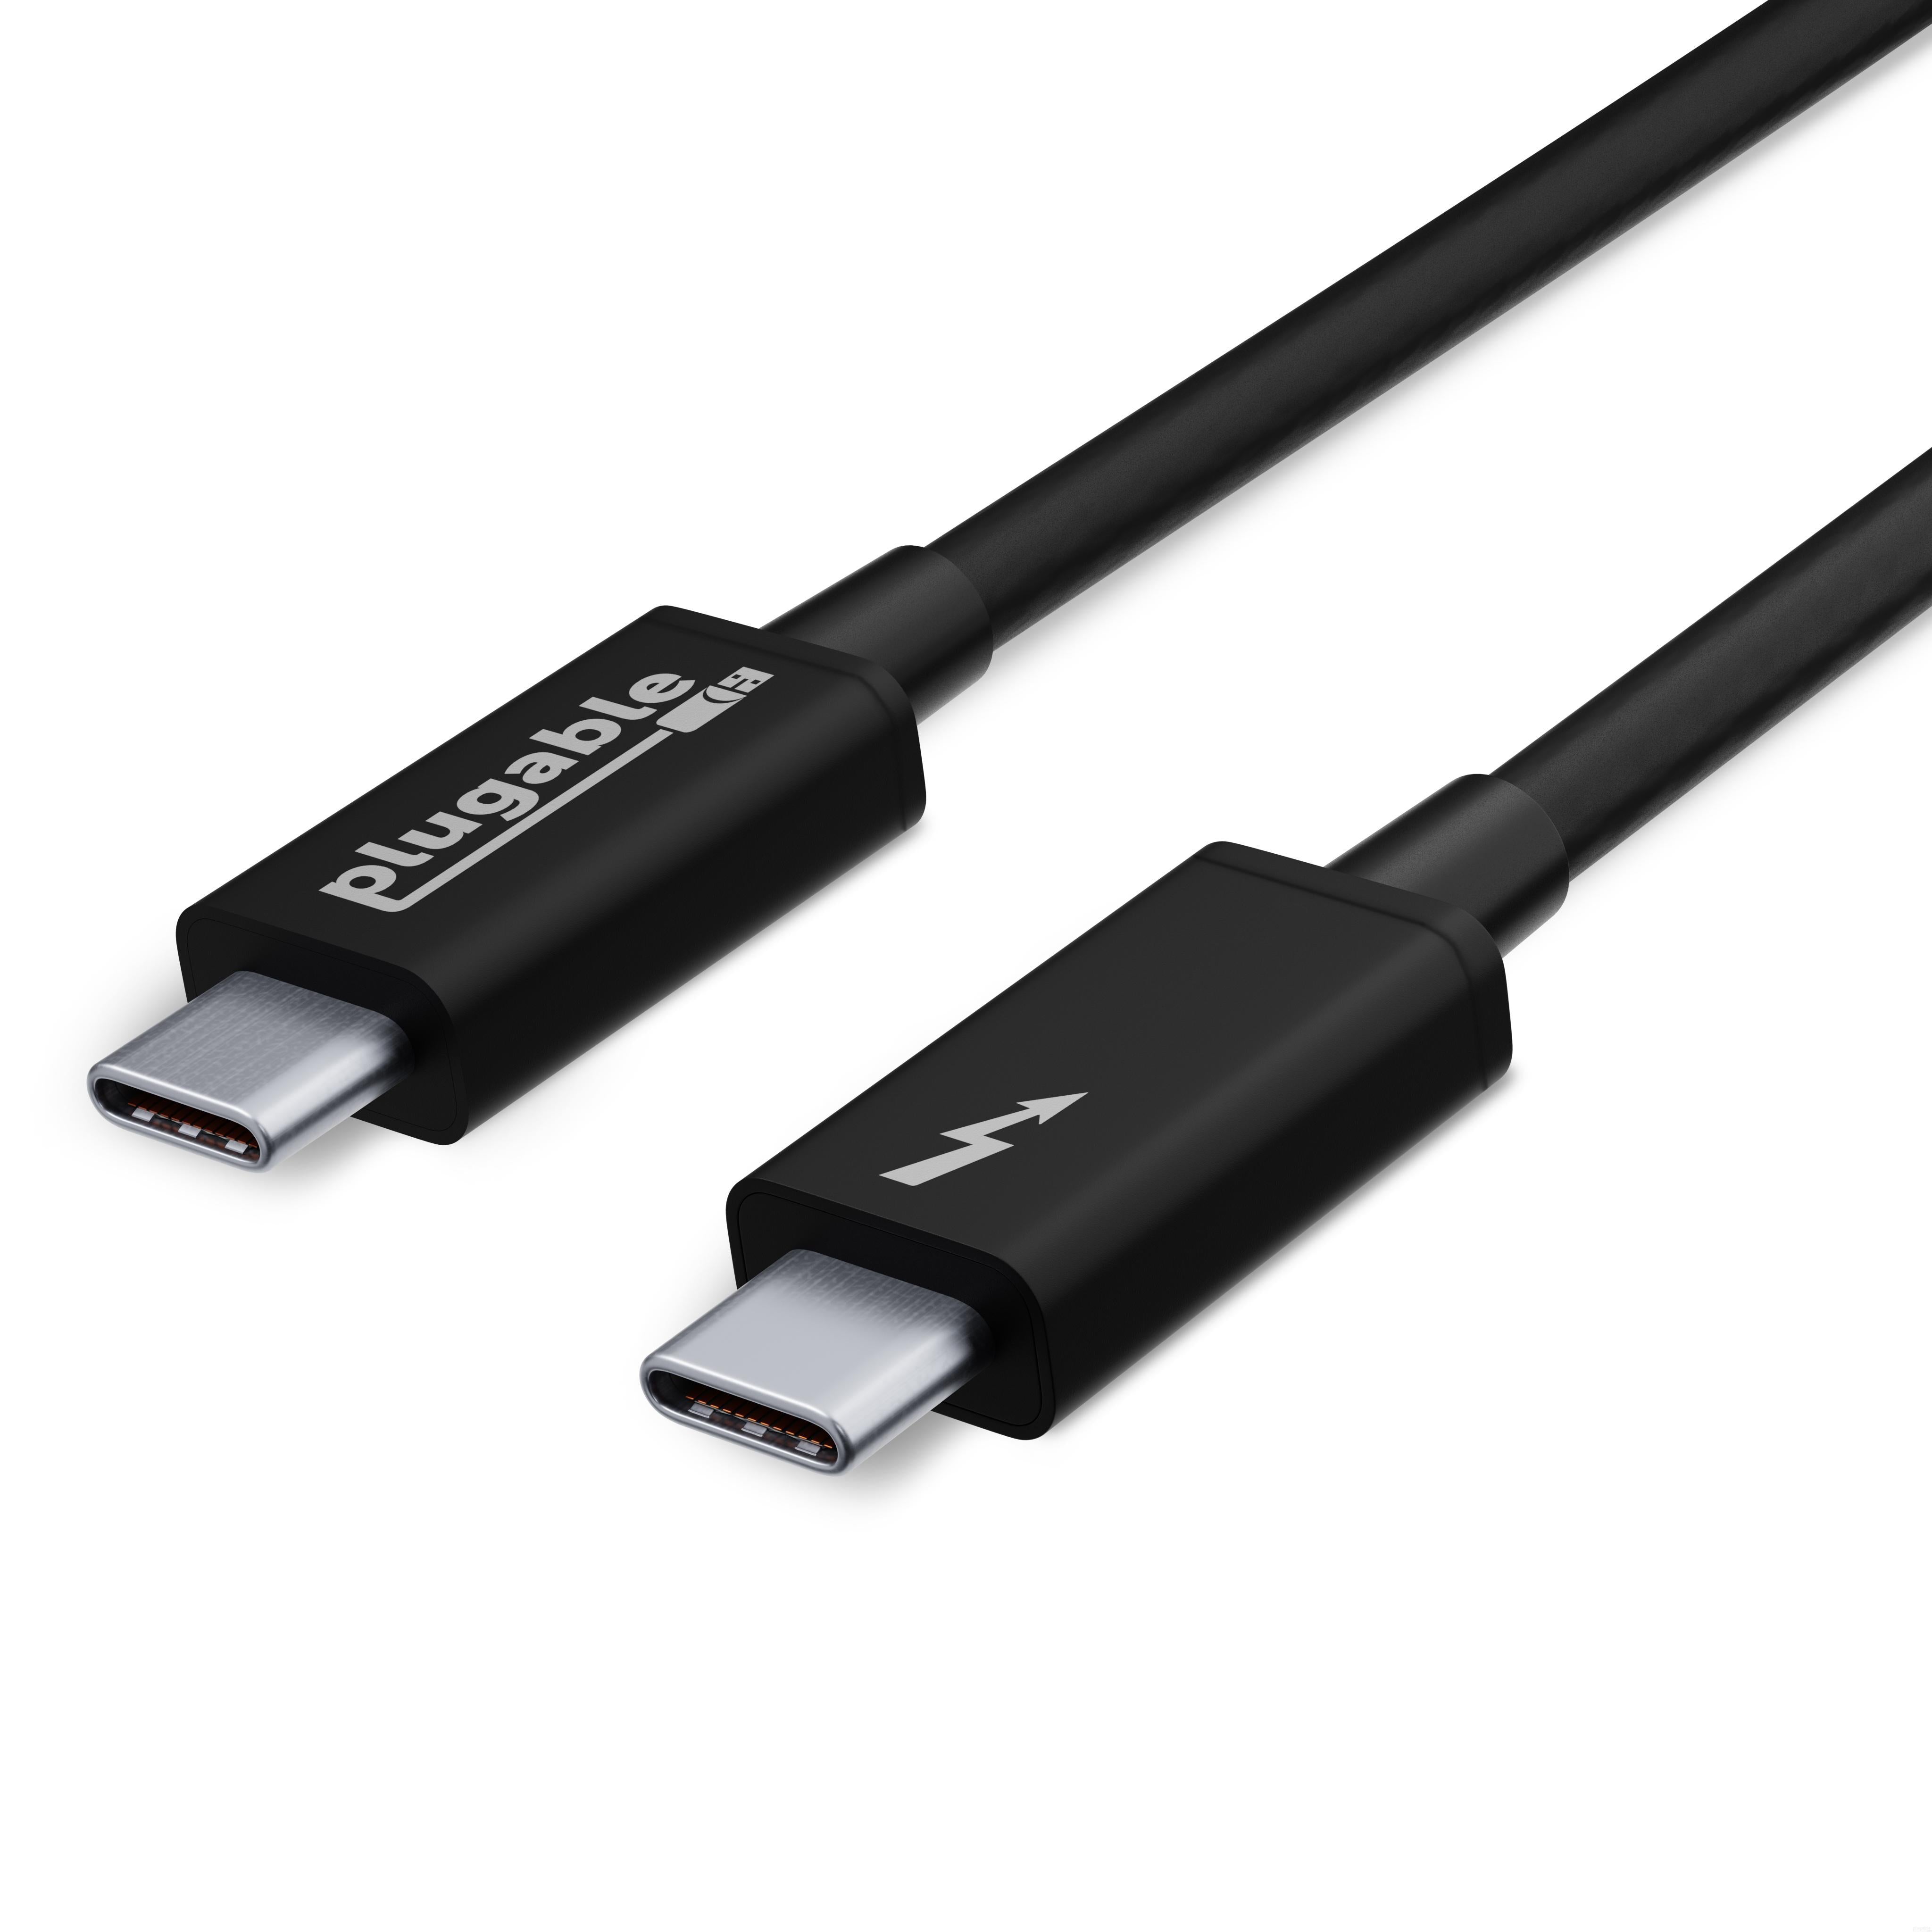 Real Thunderbolt 2 to Thunderbolt 2 Cable 20Gbps for Apple Macbook Pro mini  Imac